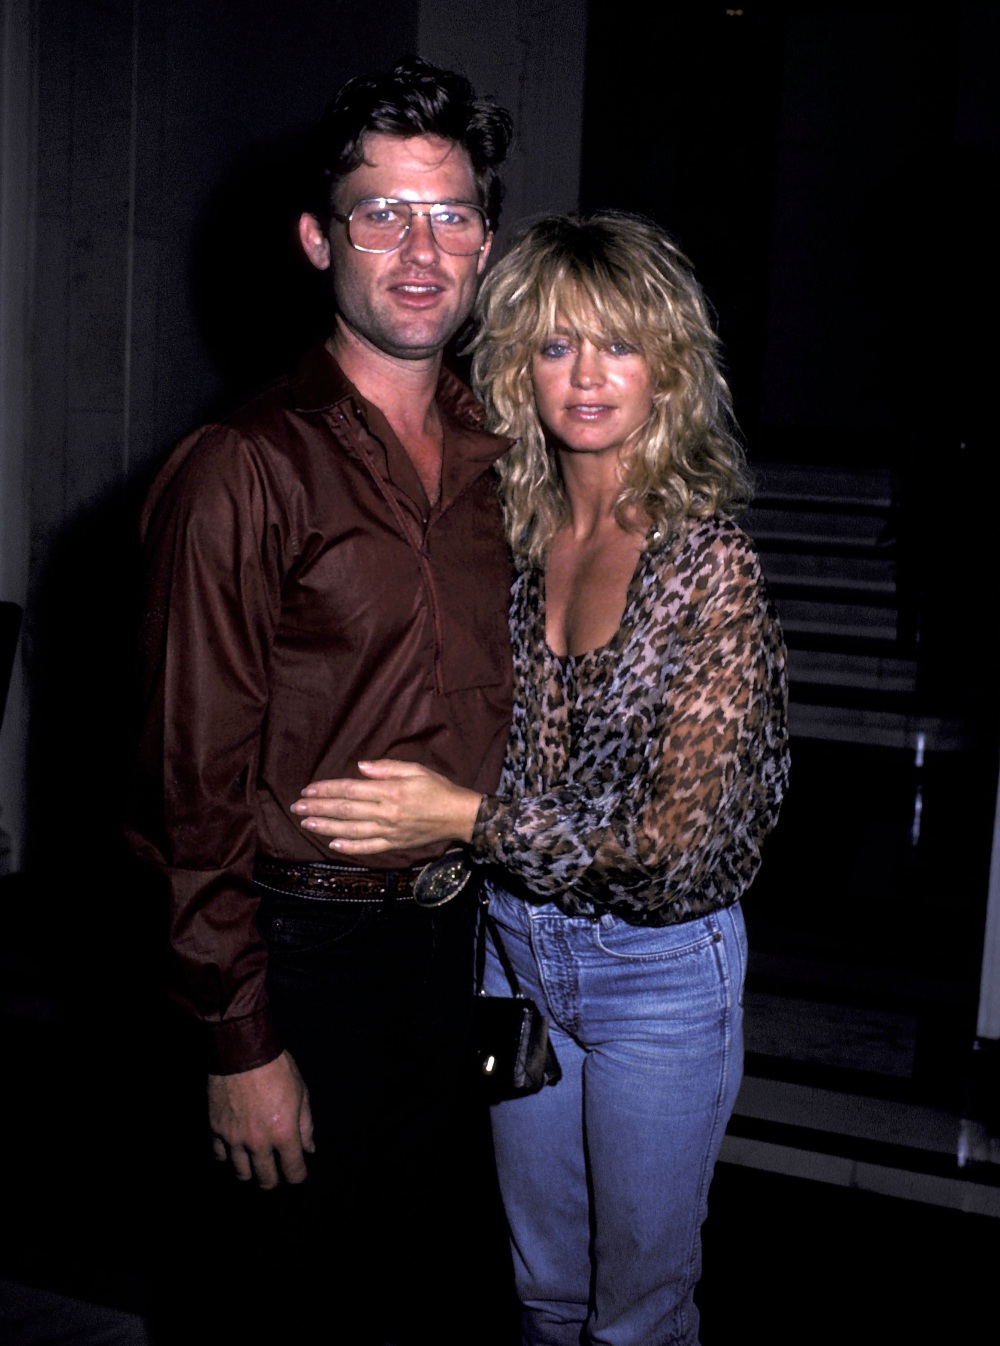 Retro photo of Goldie Hawn and Kurt russell